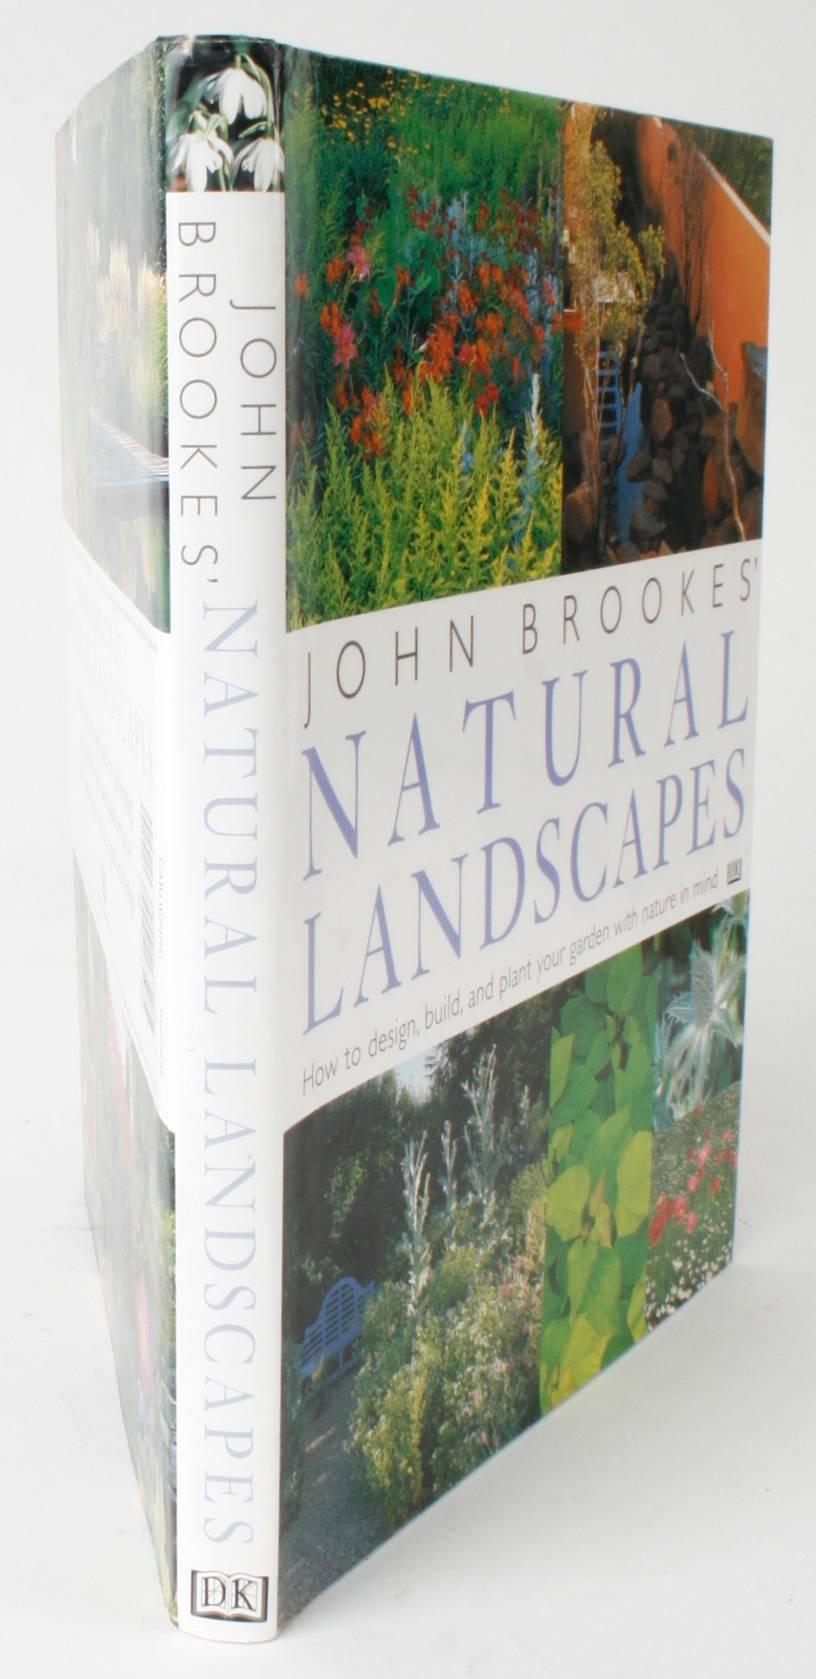 John Brookes' Natural Landscapes, First American Edition 13